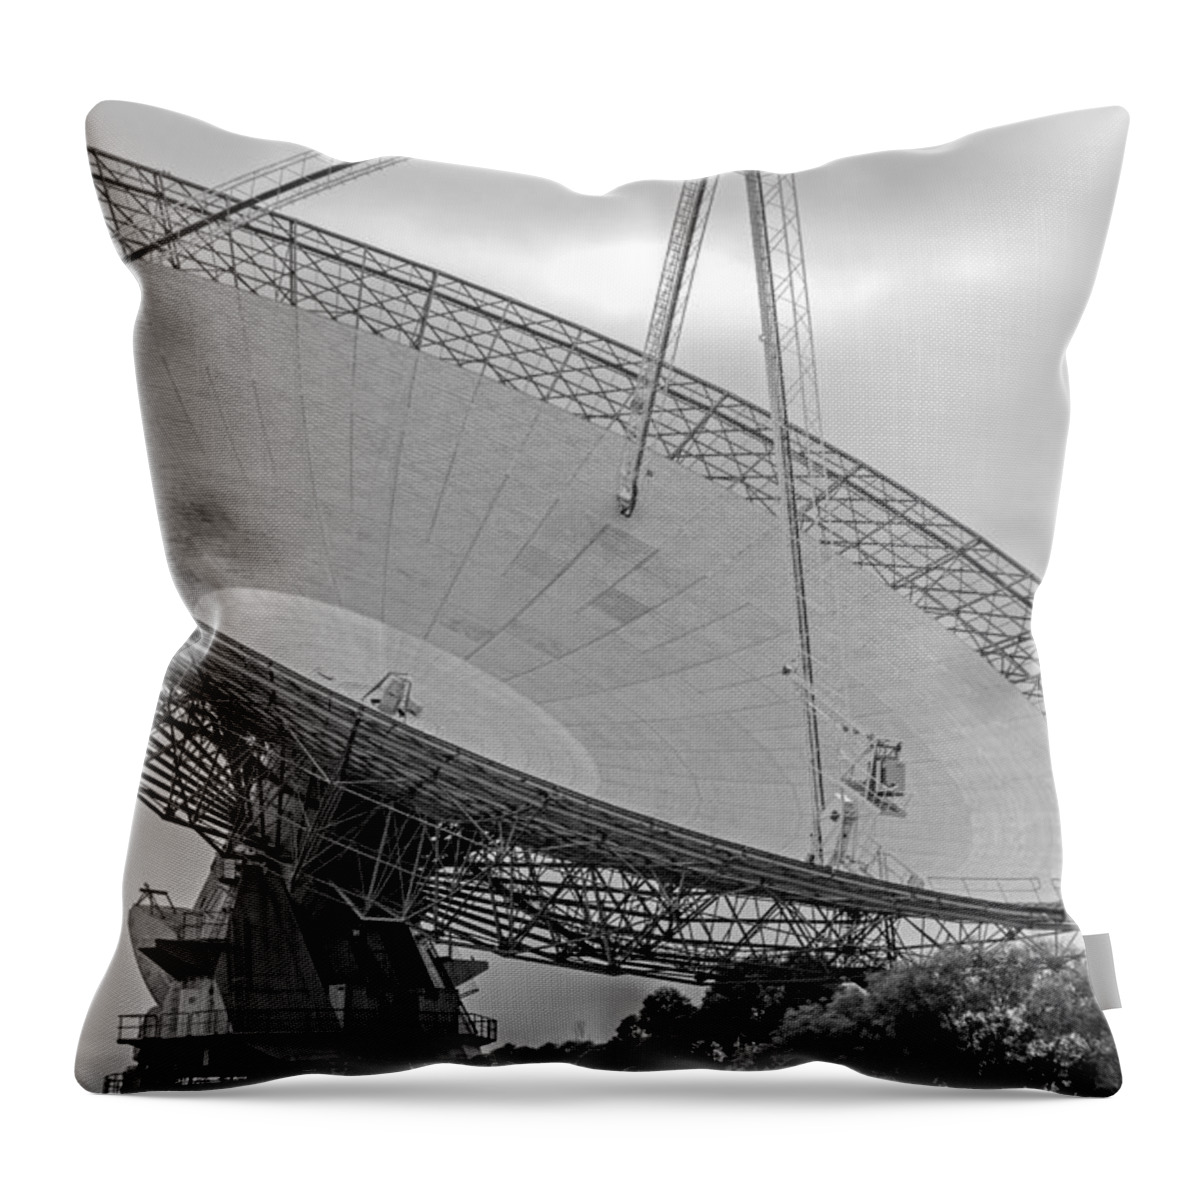 Parkes Throw Pillow featuring the photograph Parkes Observatory by Nicholas Blackwell